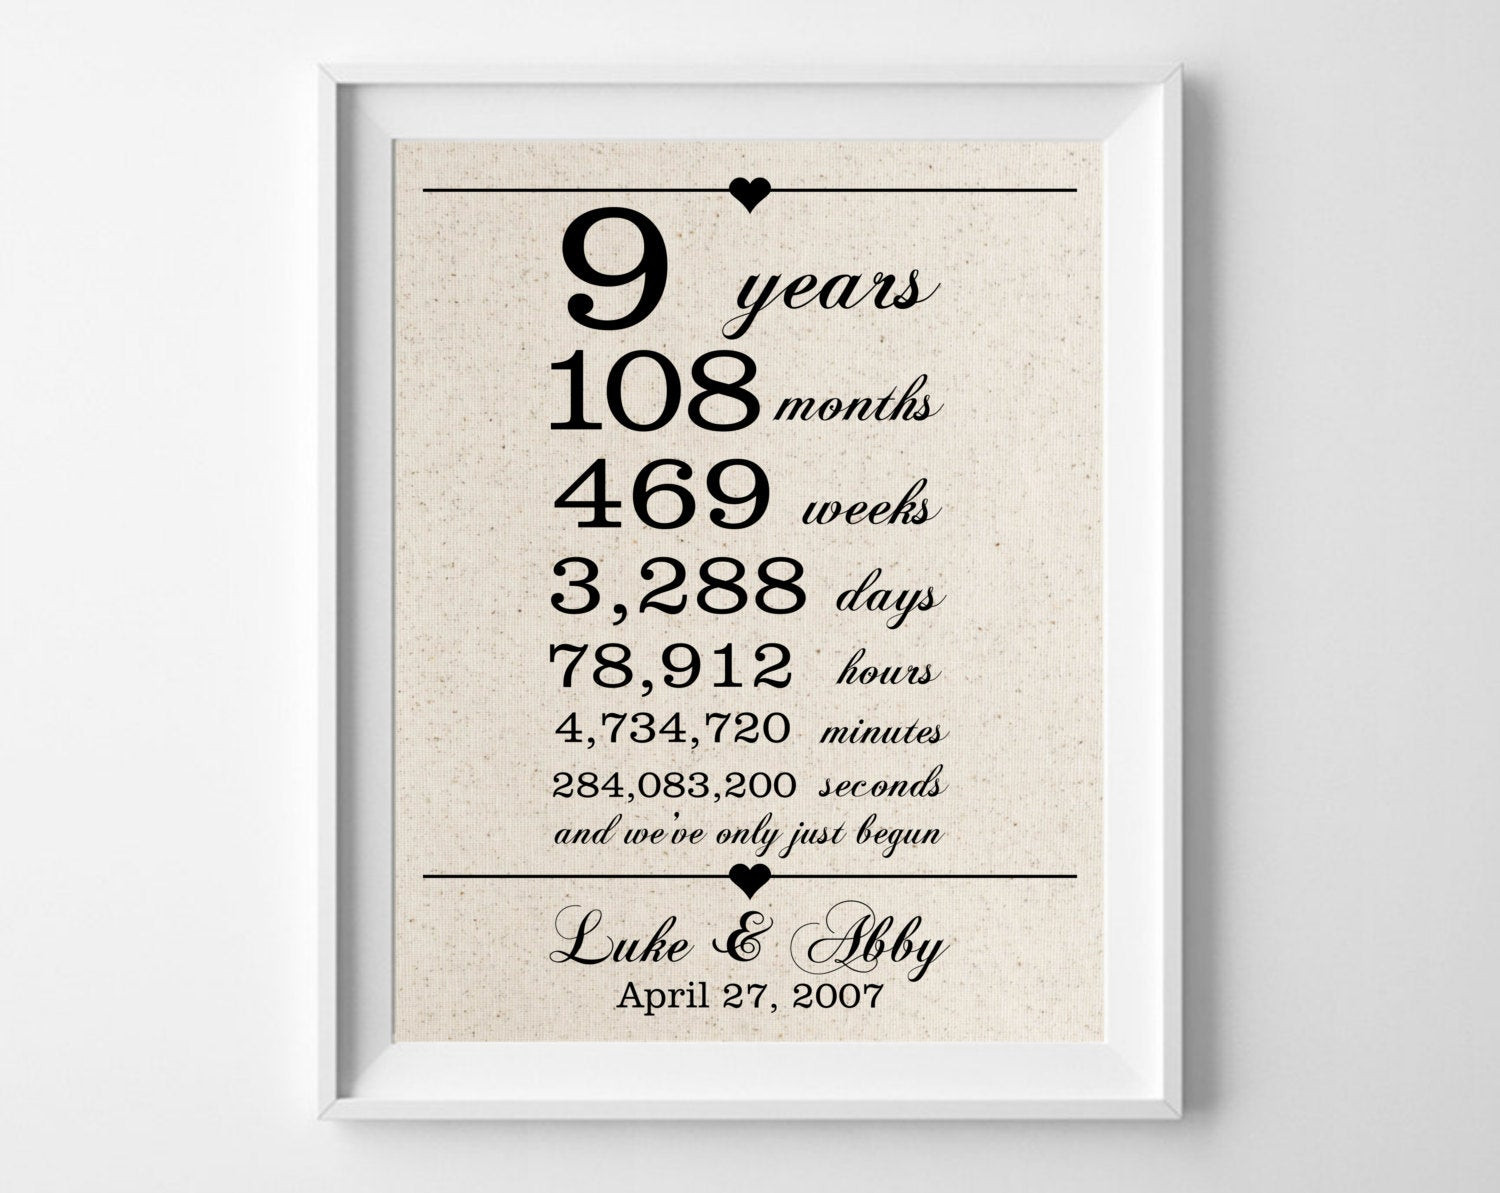 Ninth Anniversary Gift Ideas
 9 years to her Cotton Gift Print 9th Anniversary Gifts